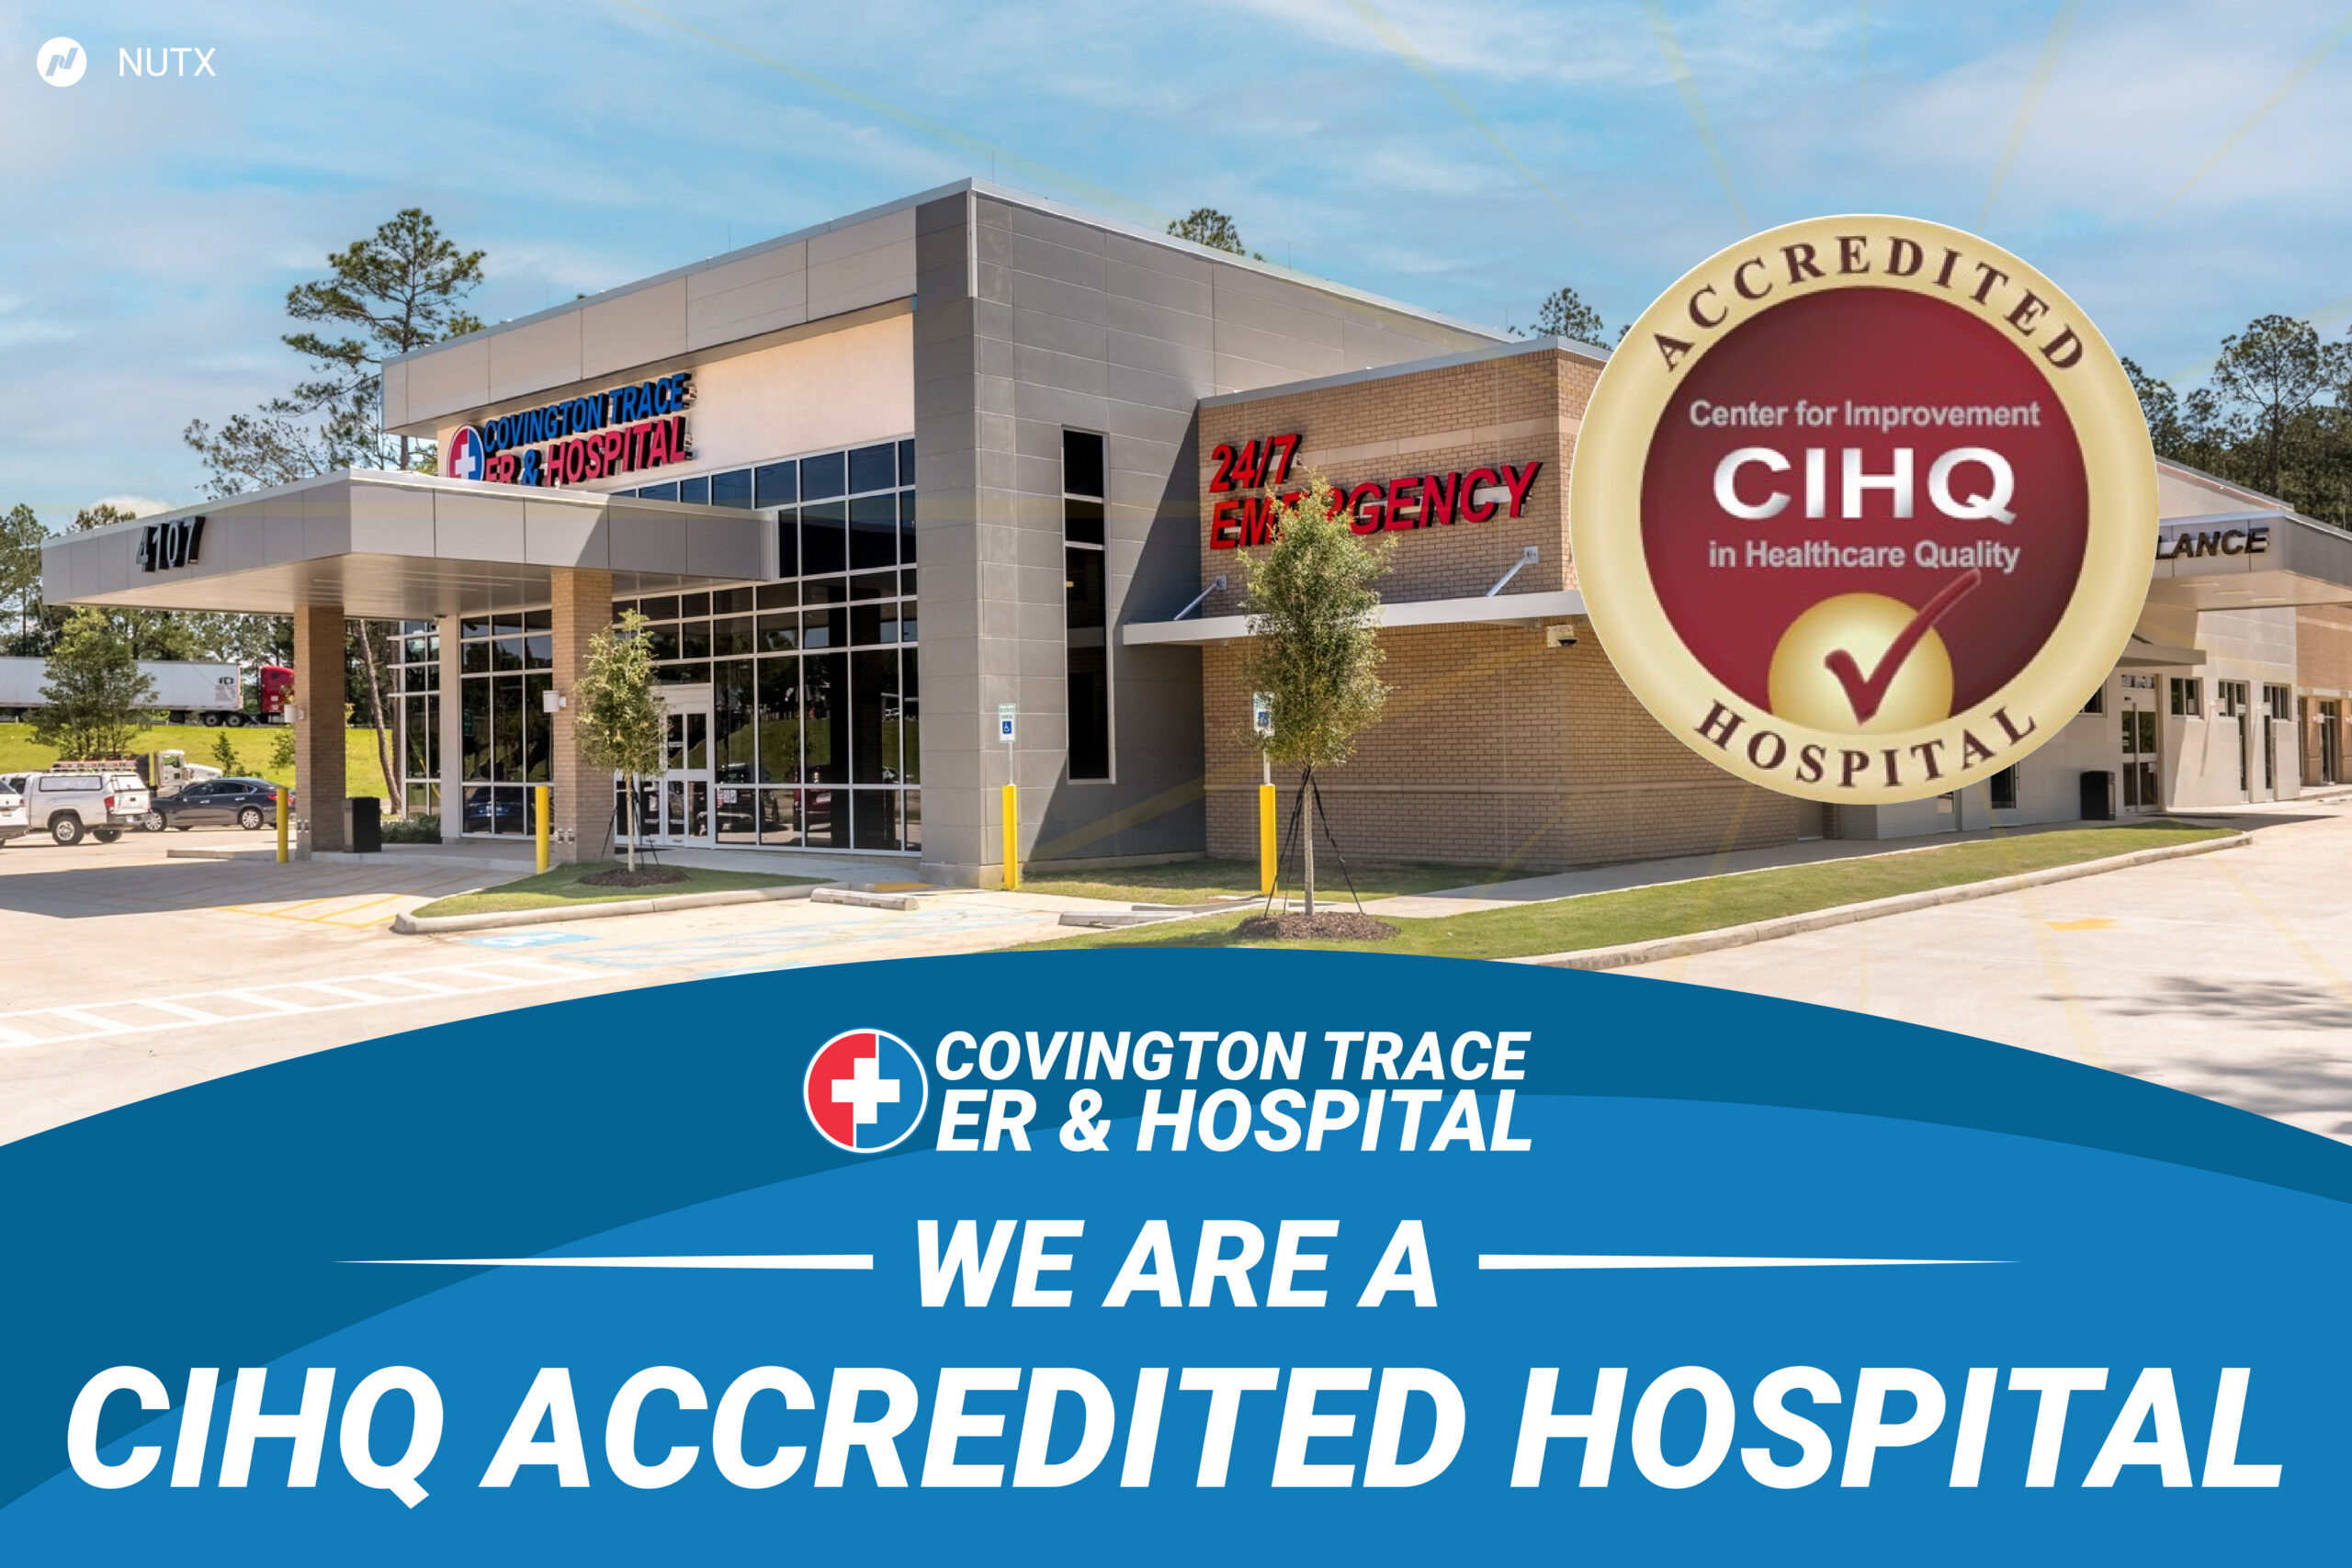 Covington Trace ER & Hospital has obtained Hospital Accreditation from the Center for Improvement in Healthcare Quality (CIHQ)